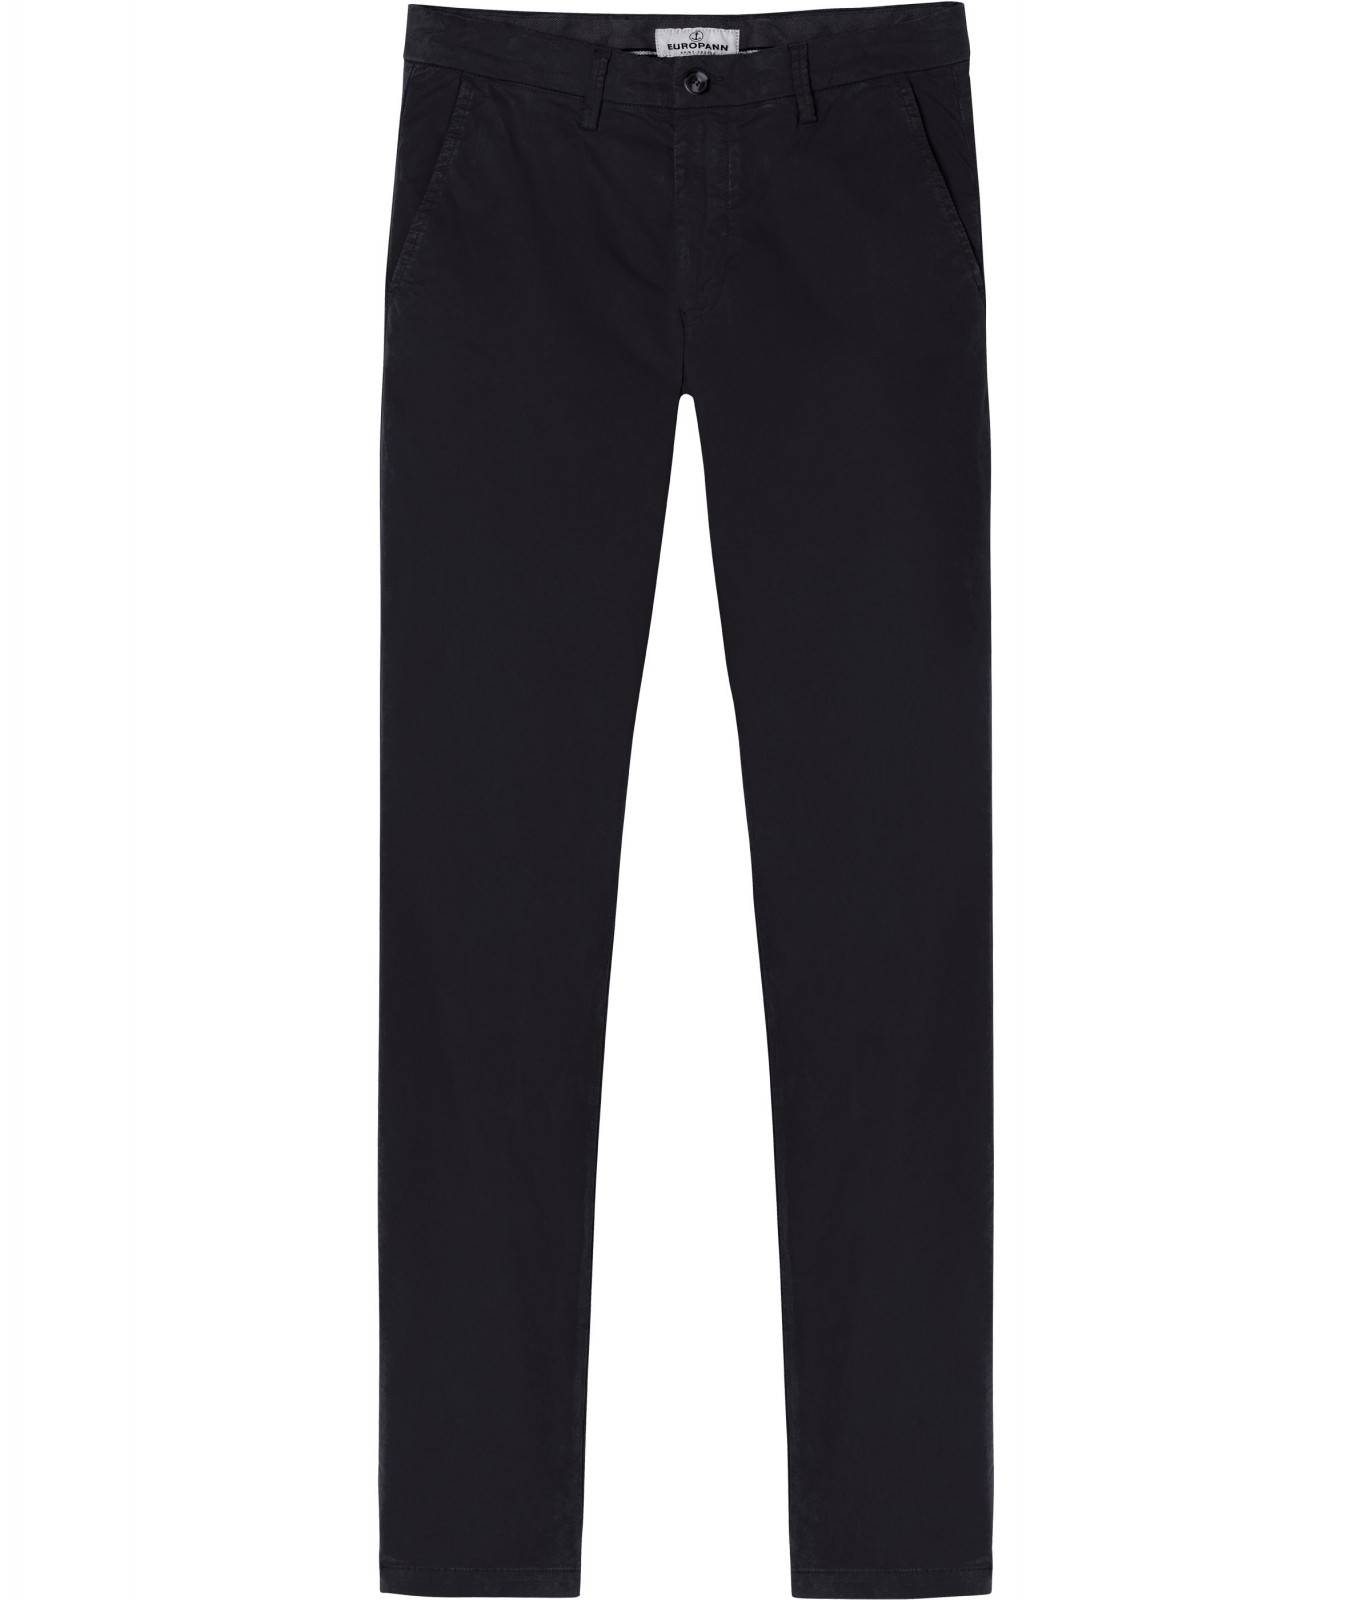 Men's Pants | Clearance | Abercrombie & Fitch